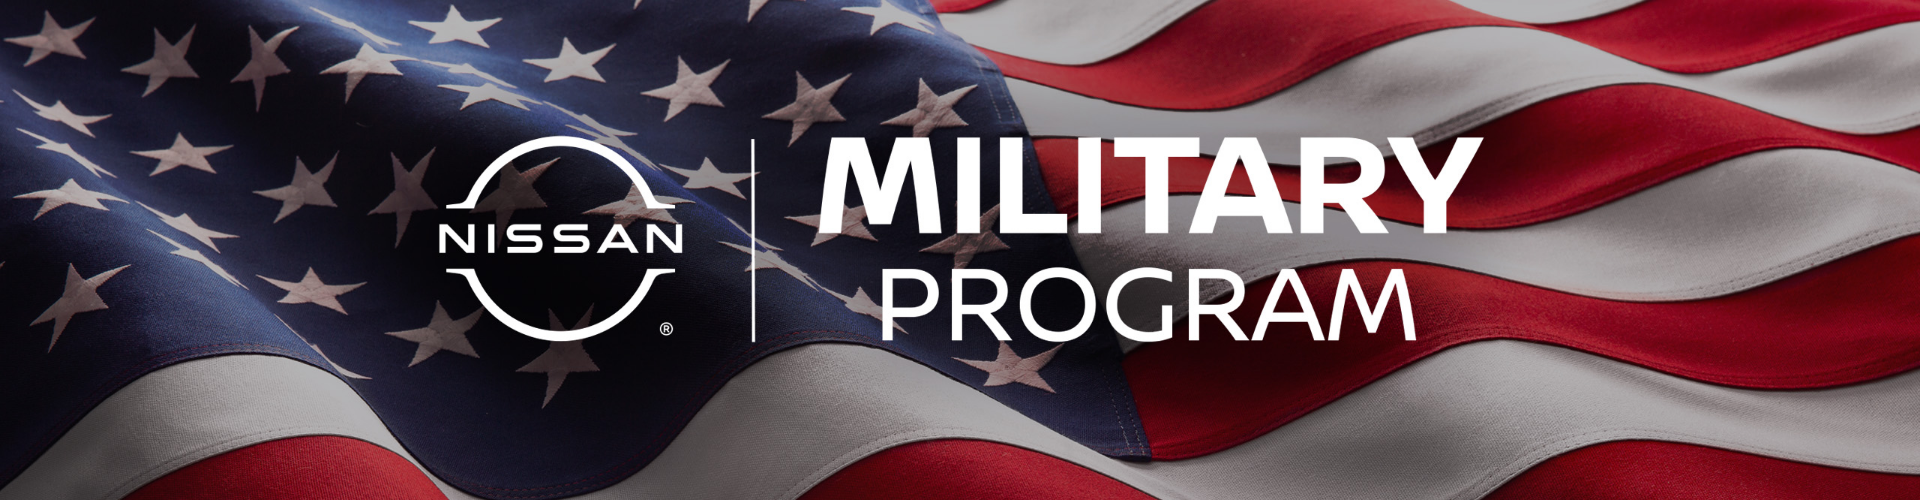 nissan military discount program Poughkeepsie Nissan Wappingers Falls NY